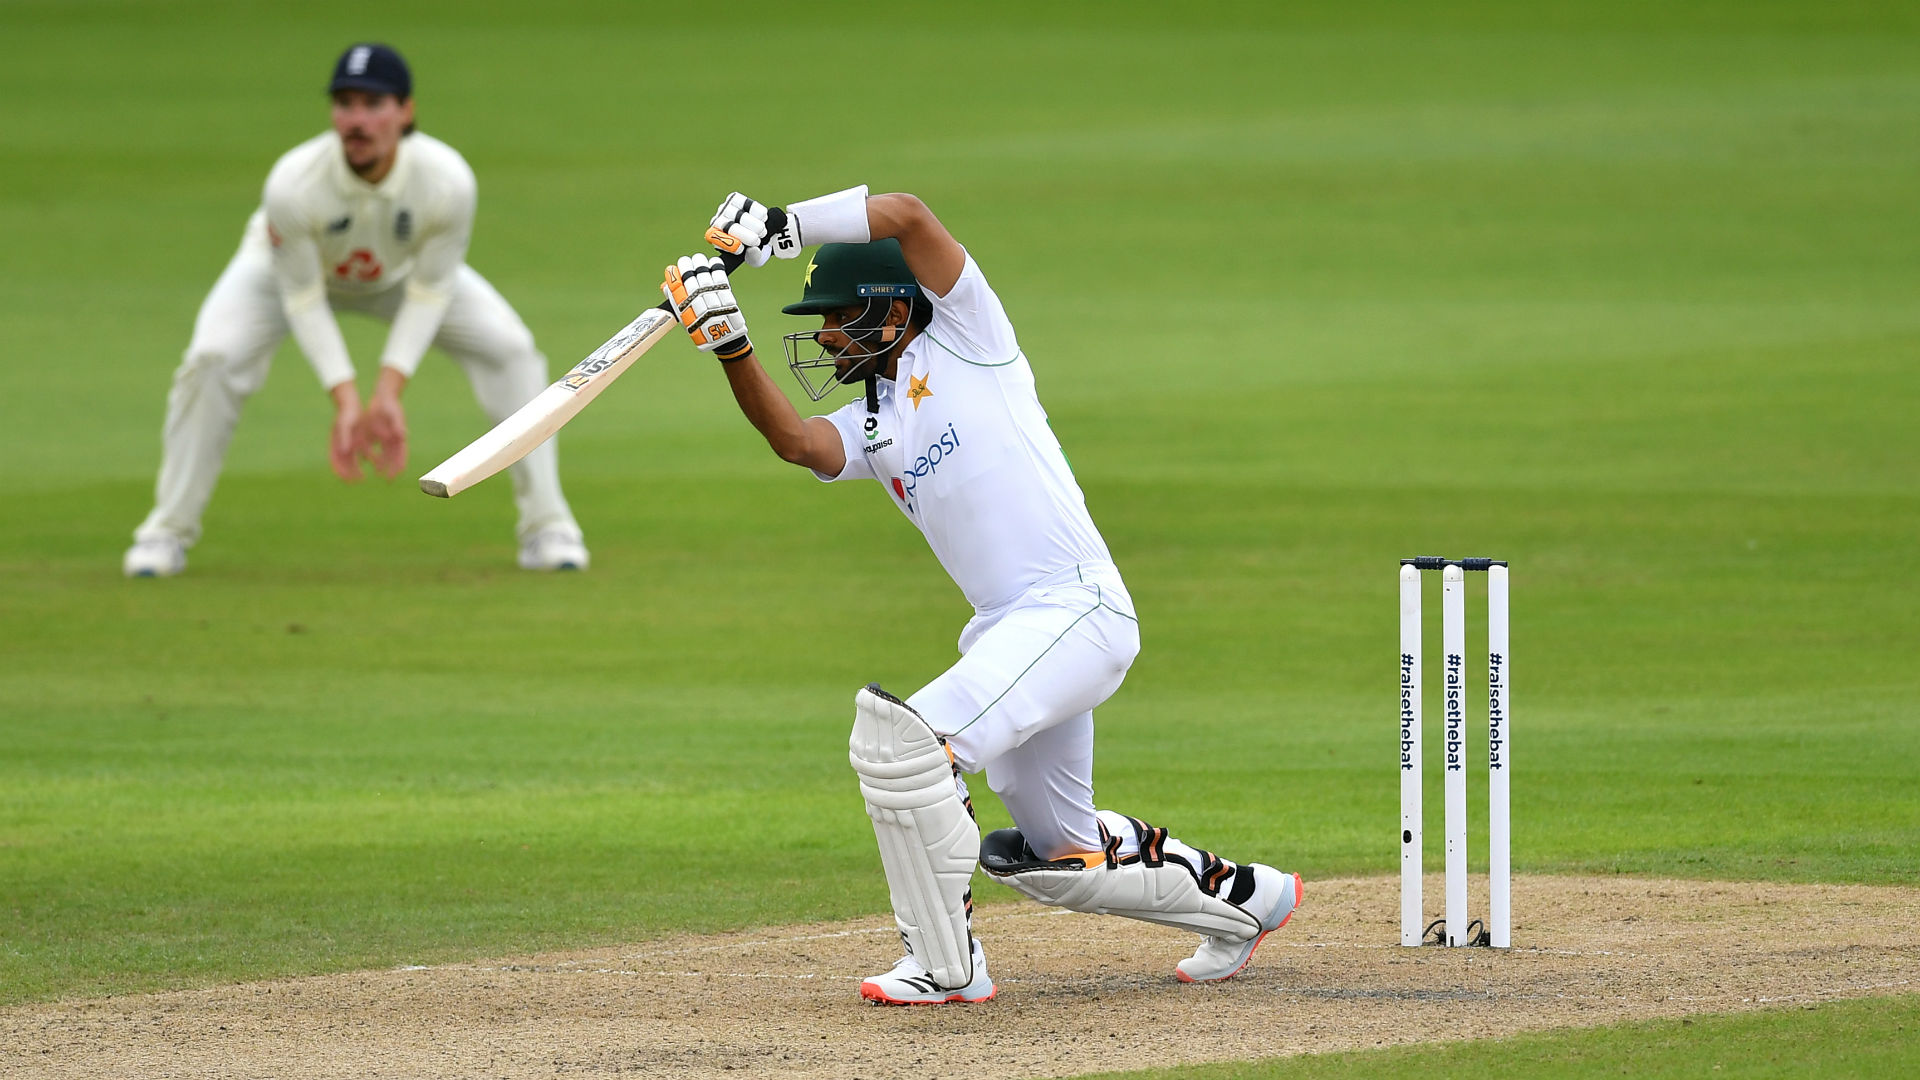 Only 49 overs were bowled on day one of the Test series at Old Trafford, with Babar Azam lighting up a gloomy day.